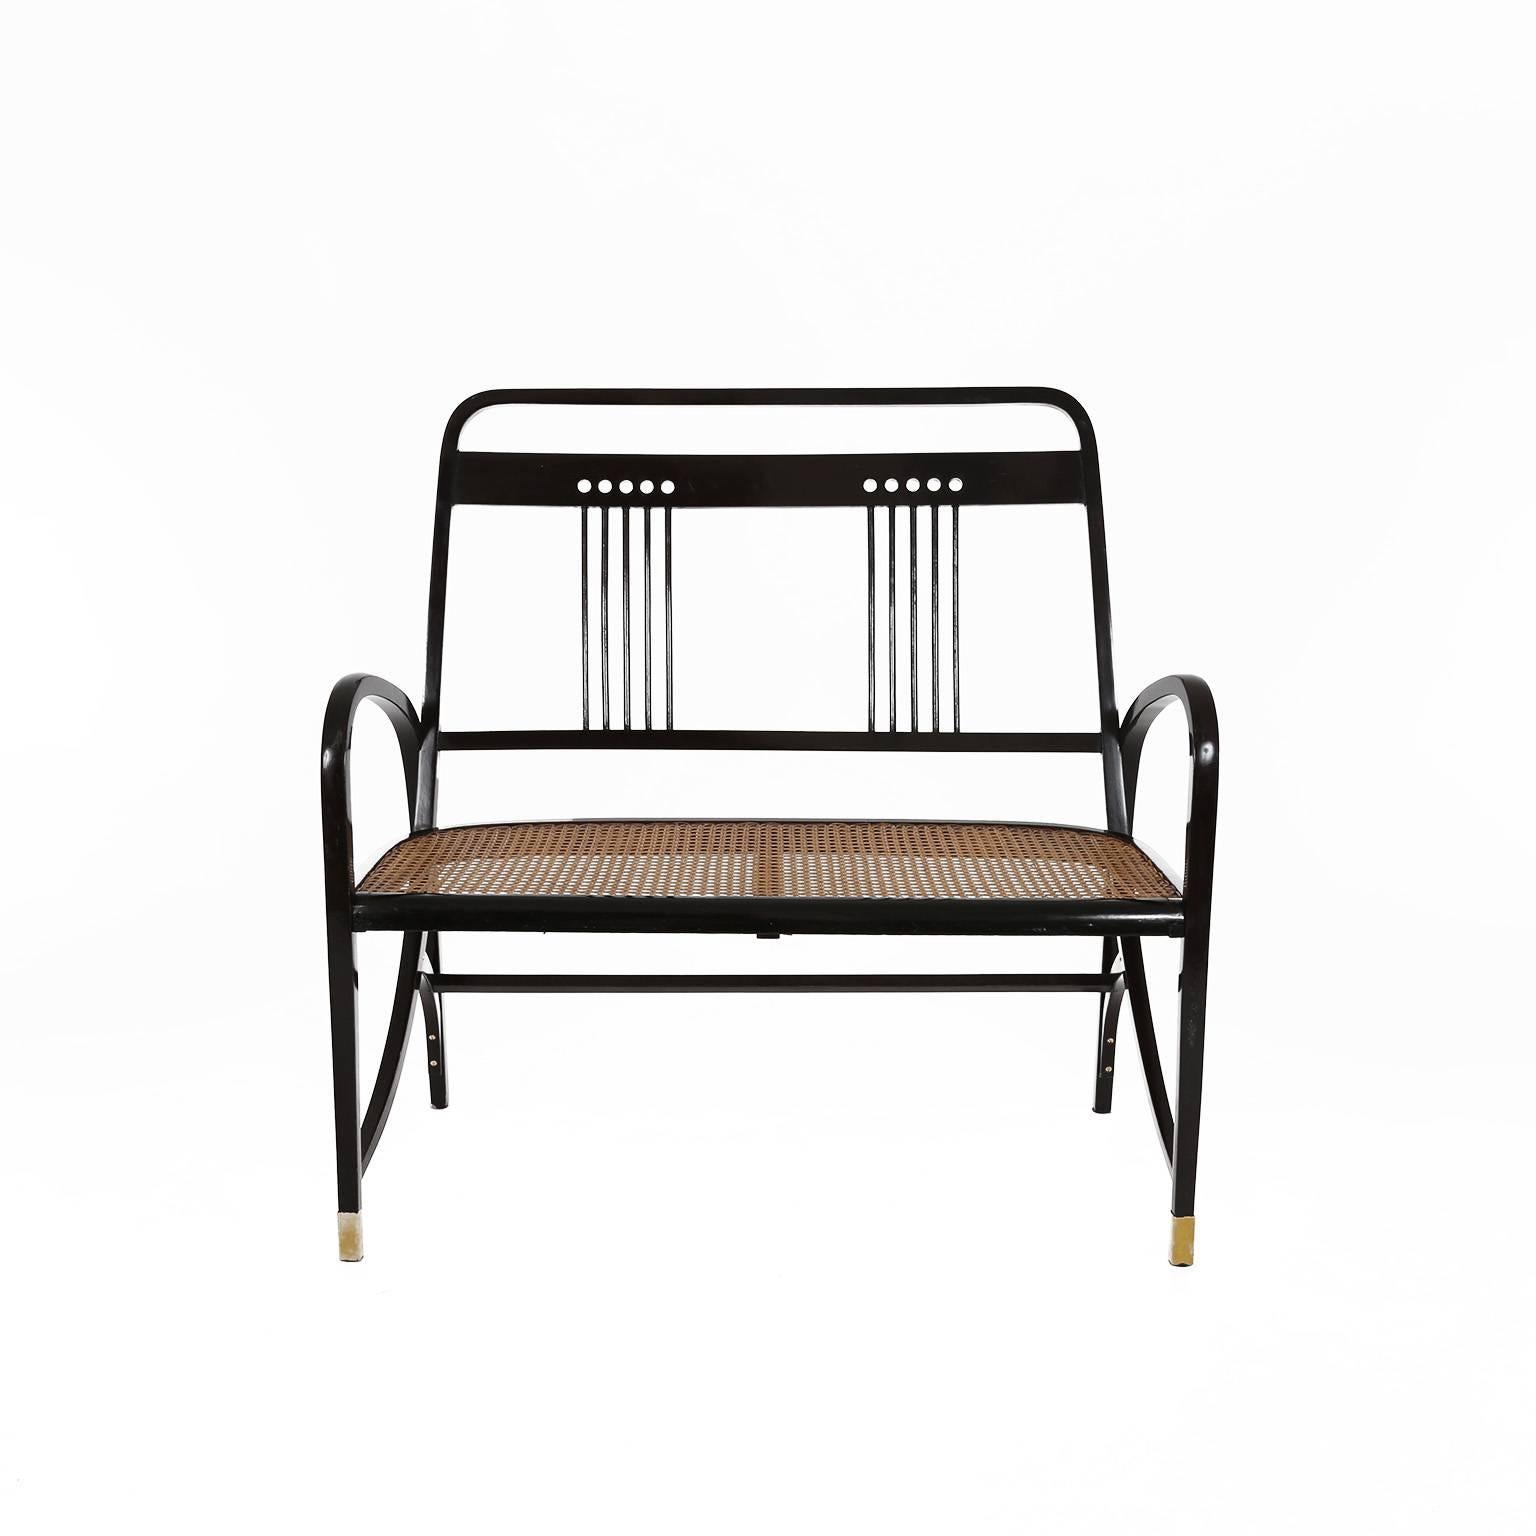 Rare Thonet Bentwood Suite Nr. 511; manufactured in Vienna, 1904 and attributed to Marcel Kammerer. This extraordinary dining suite features a bench, two armchairs and two chairs in rectangular-section bent beechwood and cane-bottomed. Paper label